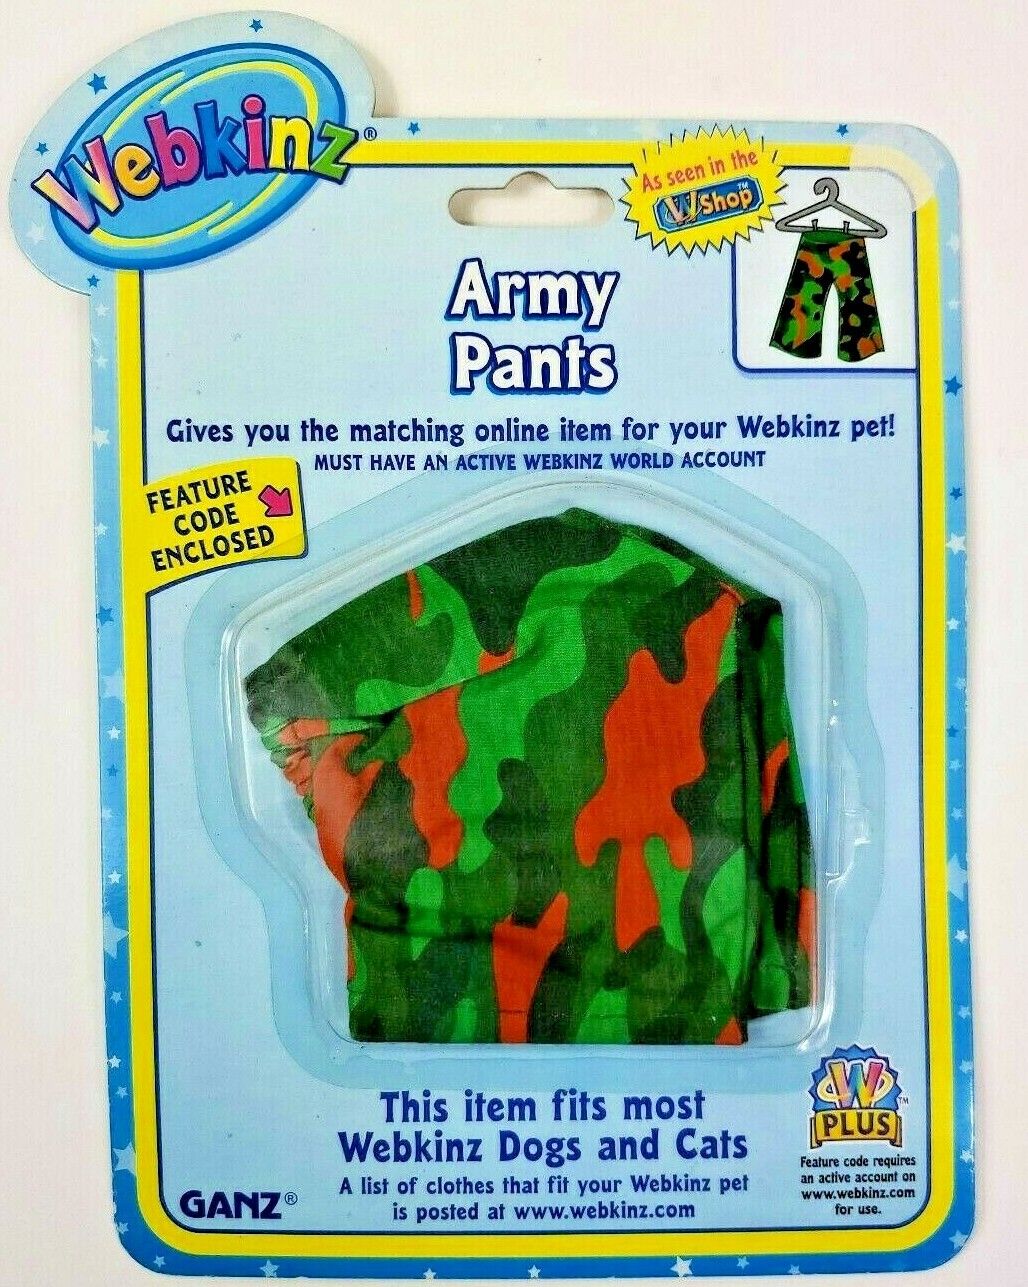 Pet Clothes, Ganz Webkinz  Army Pants Fits most Webkinz Dogs and Cats